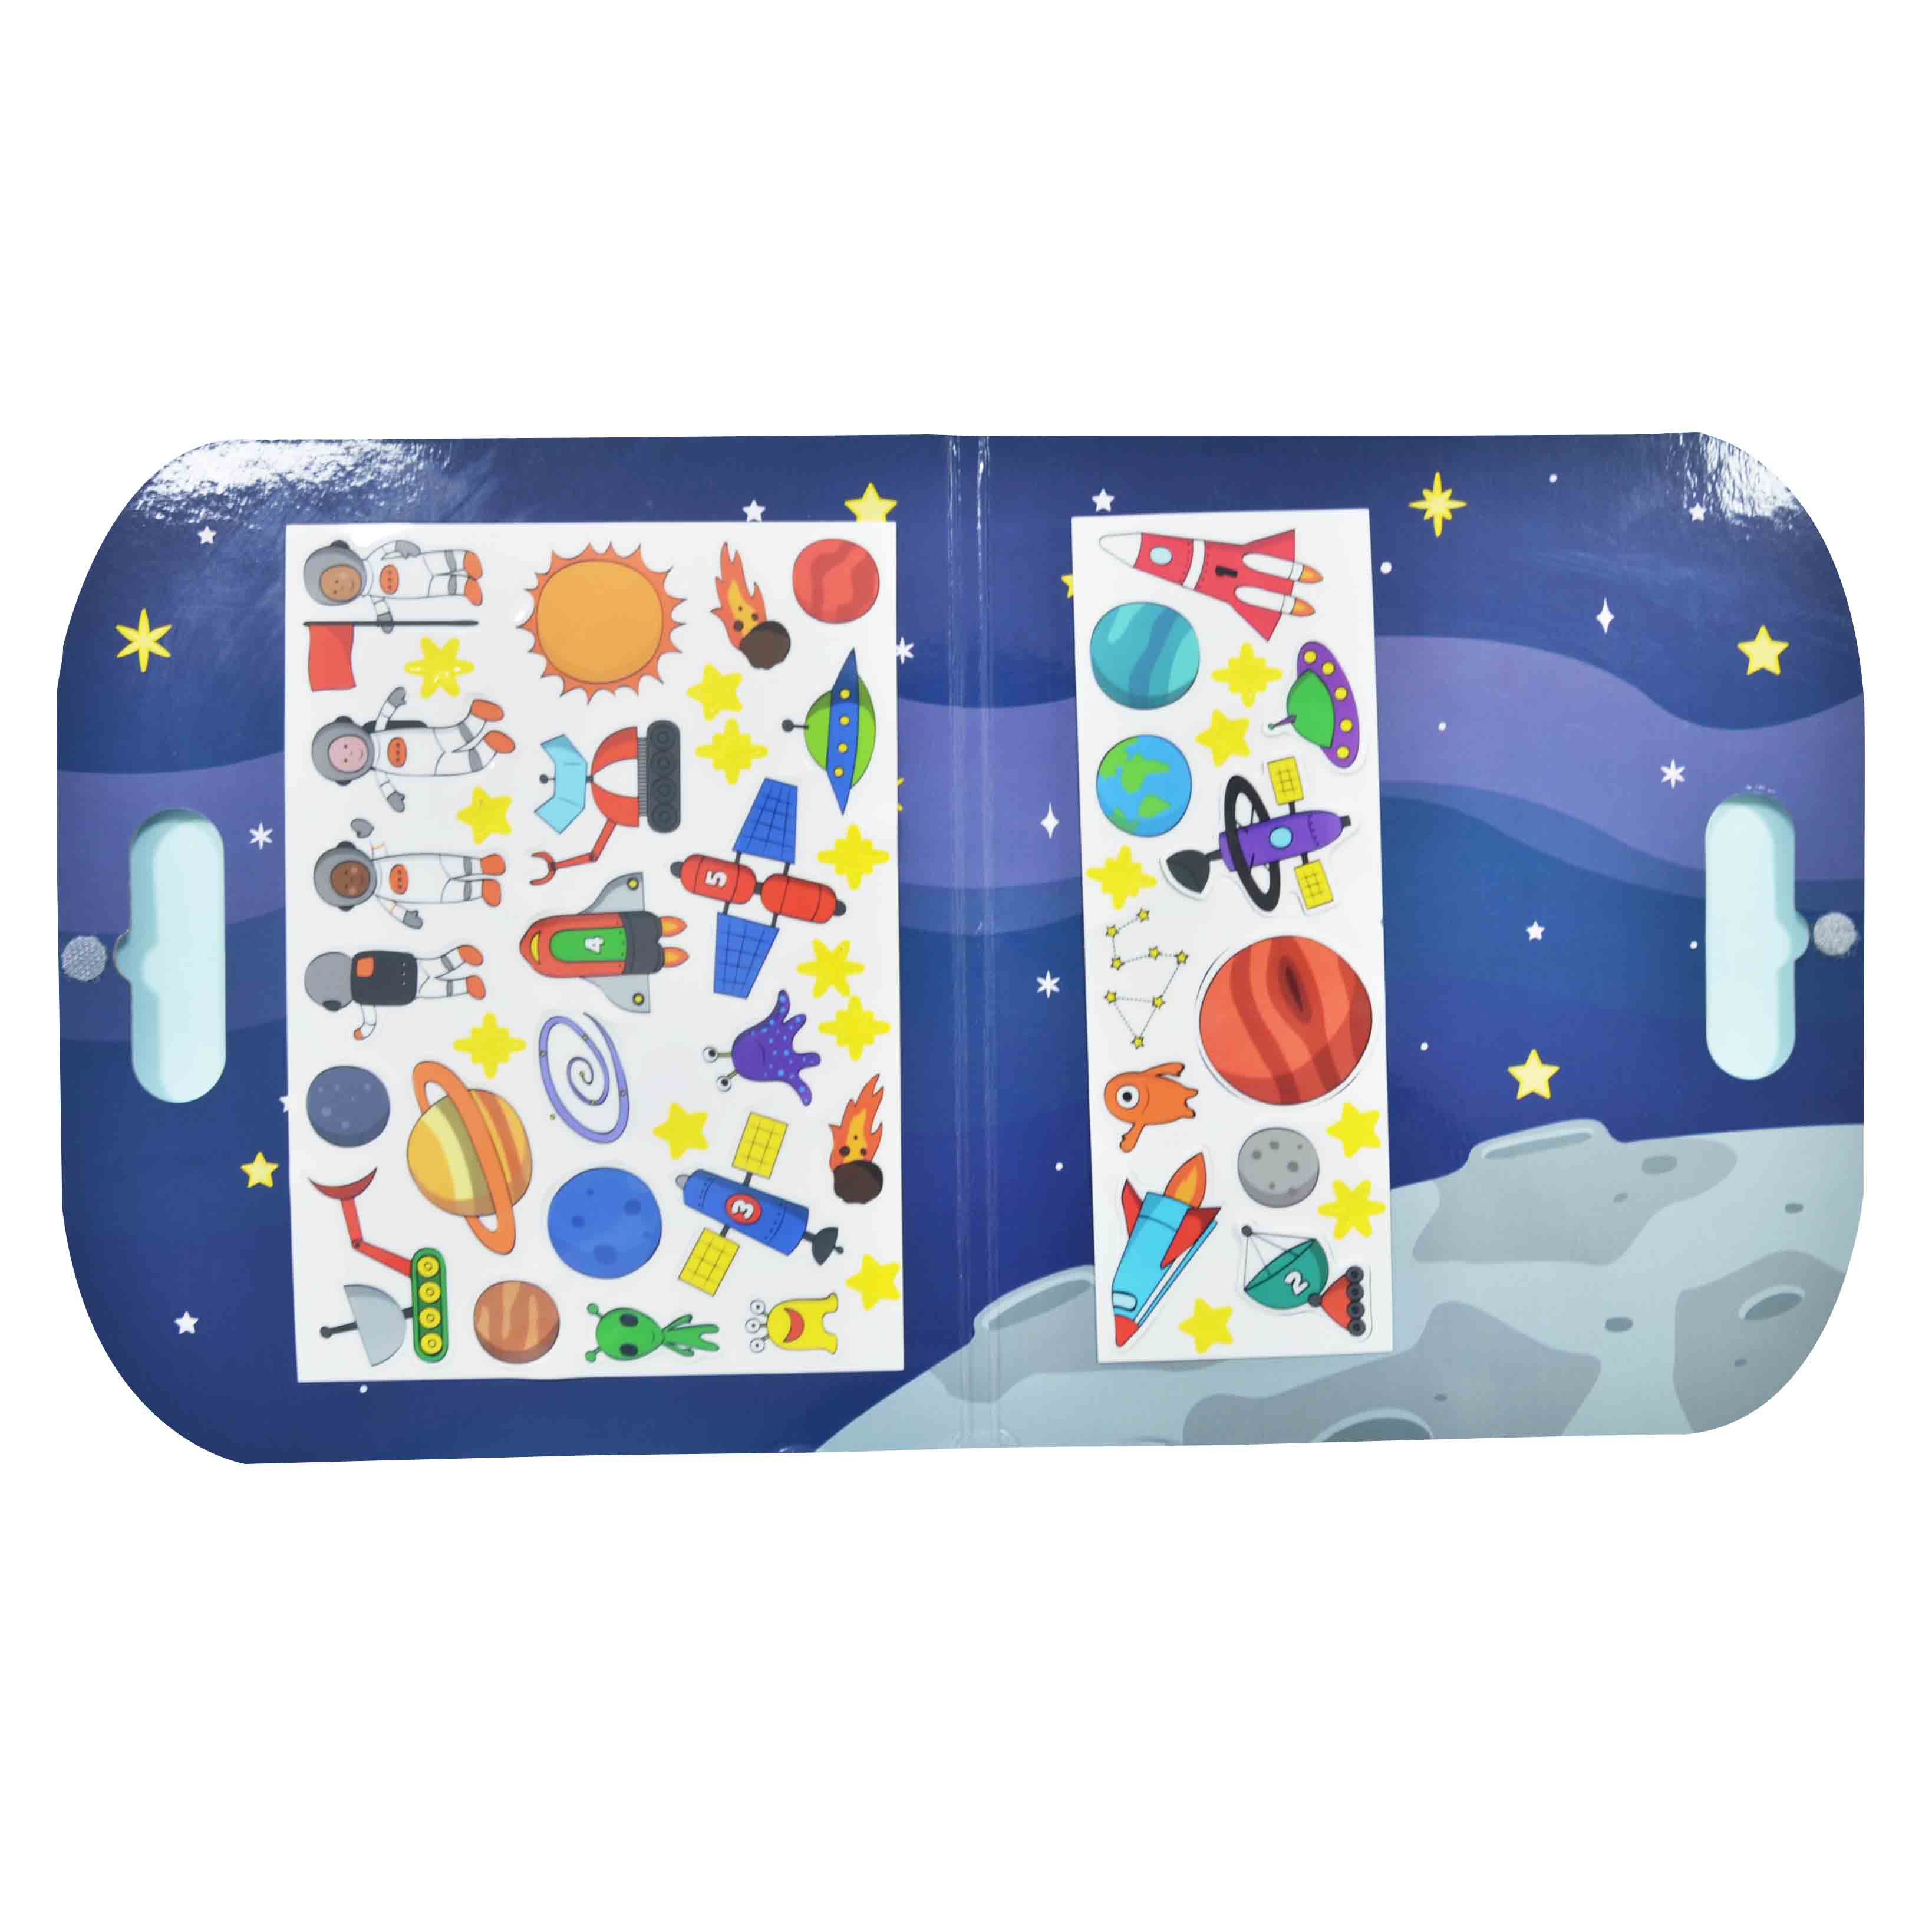 Novelty 1mm Thick Reusable Sticker Play Board With Colourful Space Design For Boys